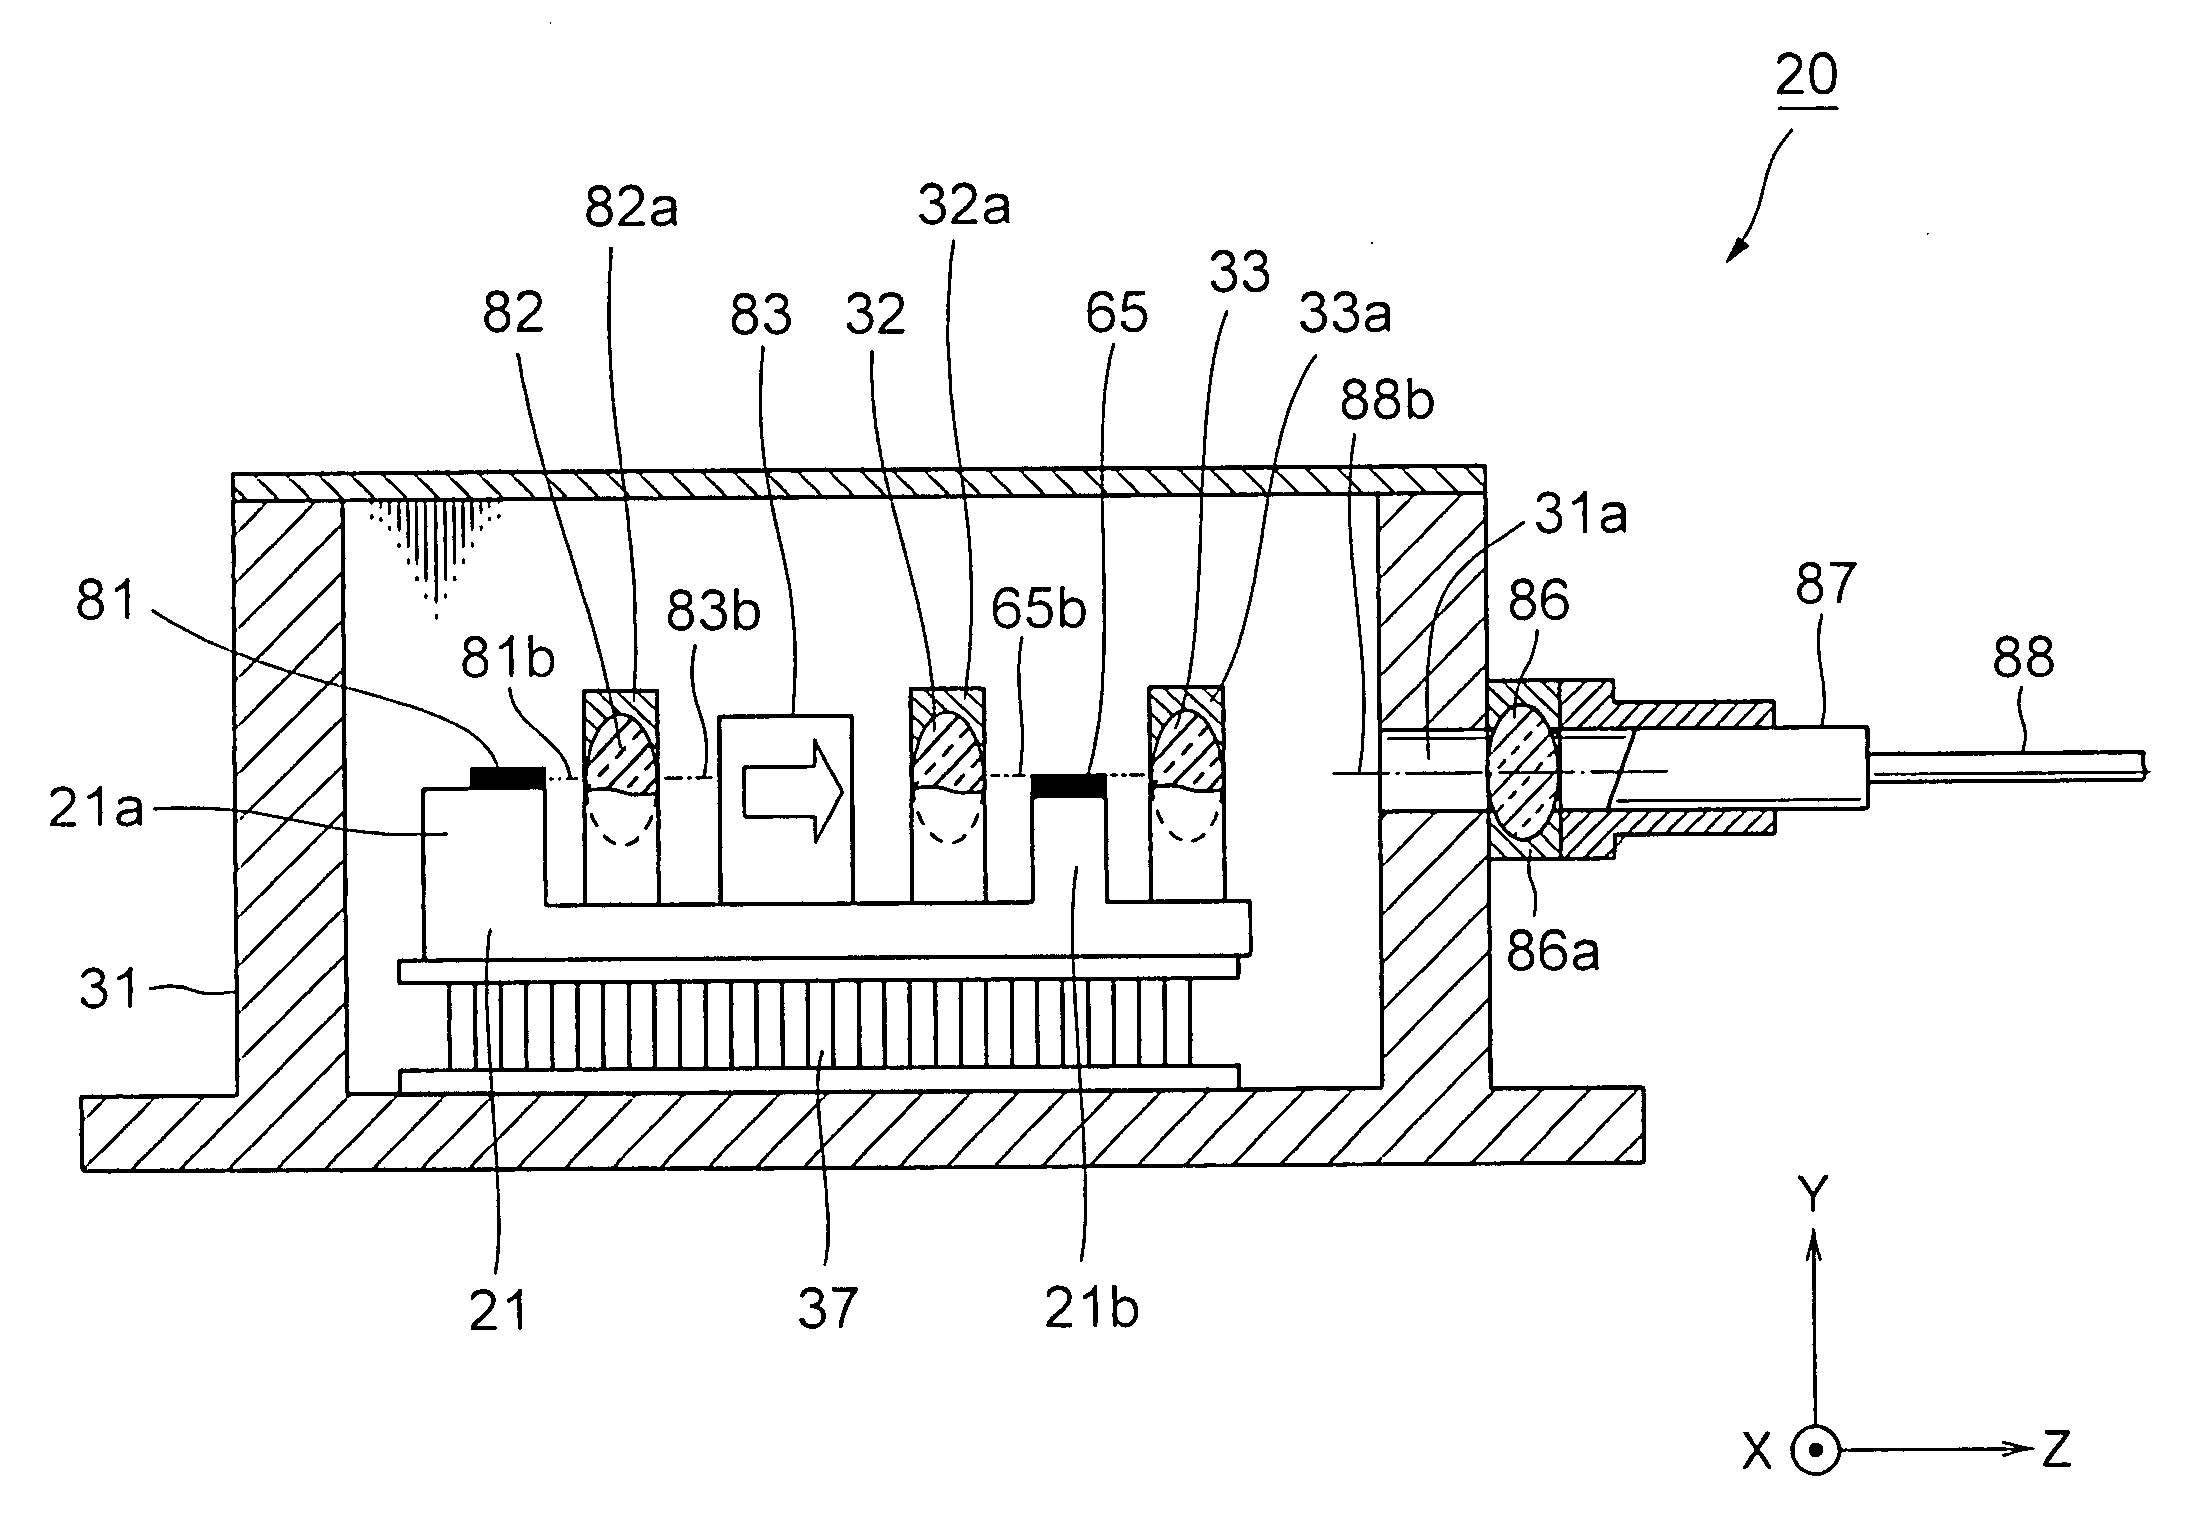 Semiconductor laser module and method of assembling the same